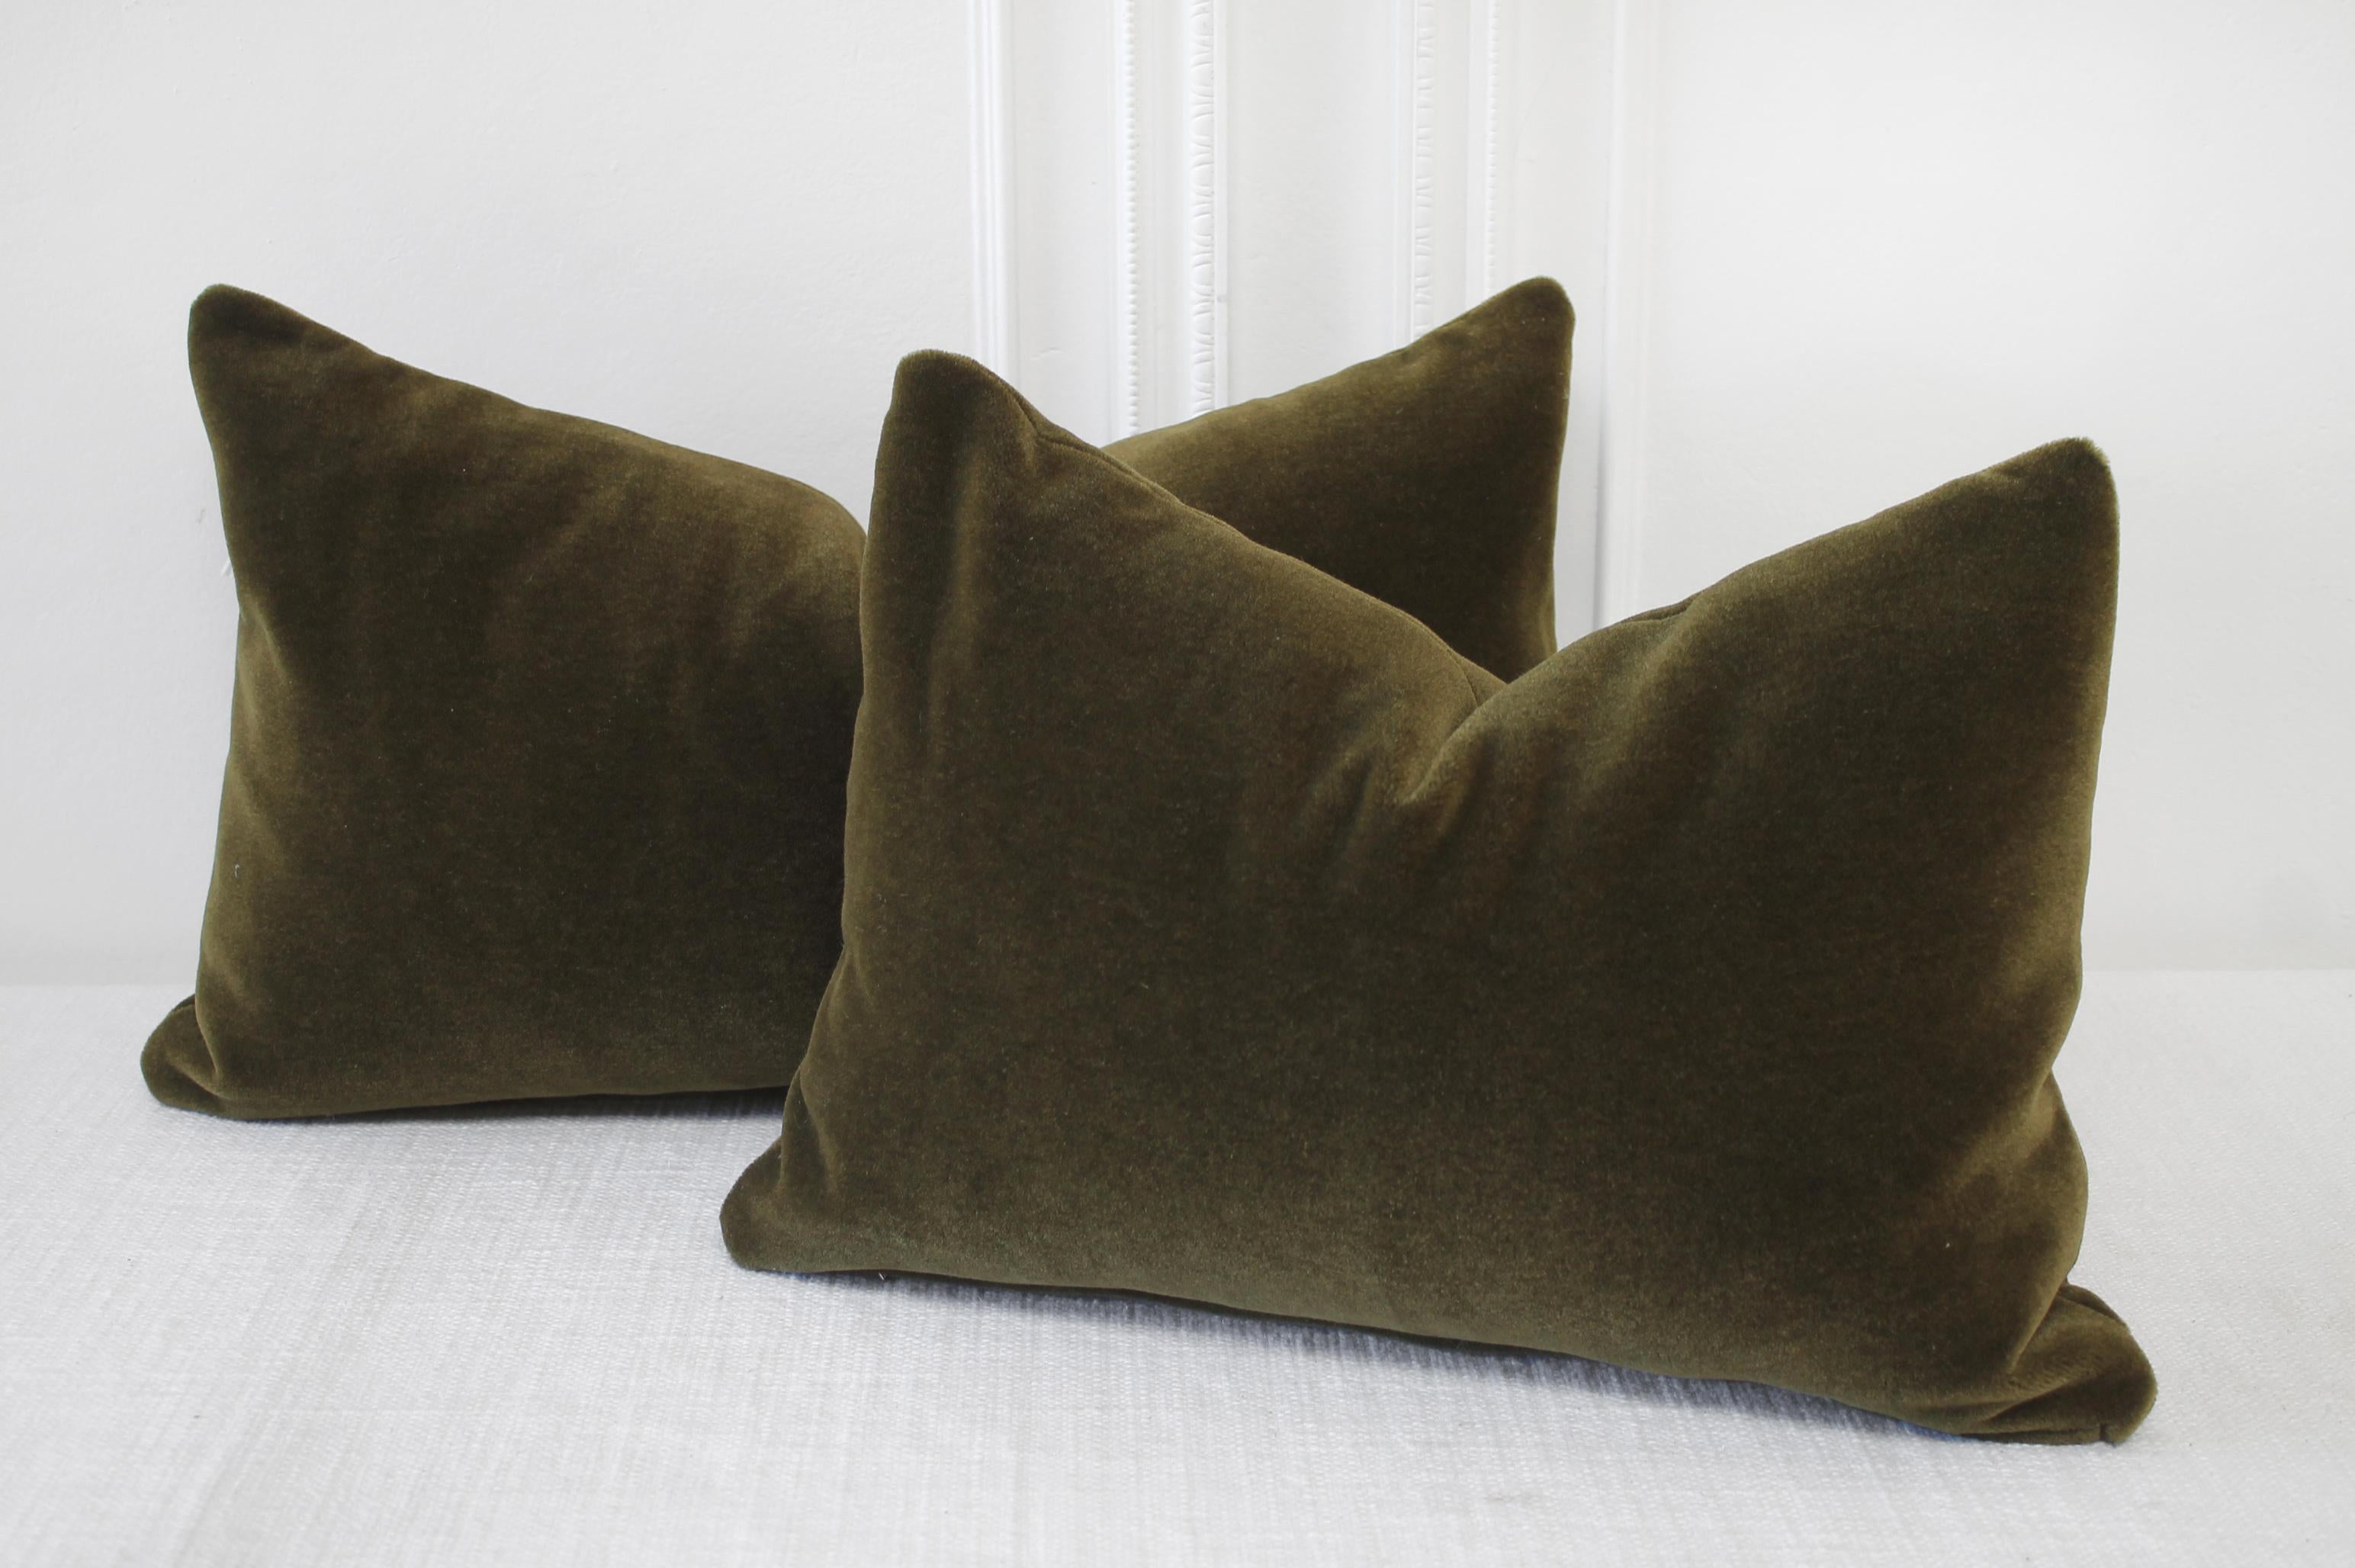 Deep Moss Green Mohair Lumbar accent pillows
Custom made in a deep moss green, these luxurious mohair pillows are a great accent to a sofa, a bed, chairs. Zipper closure, down insert is included.
We recommend dry cleaning only. Custom sizes